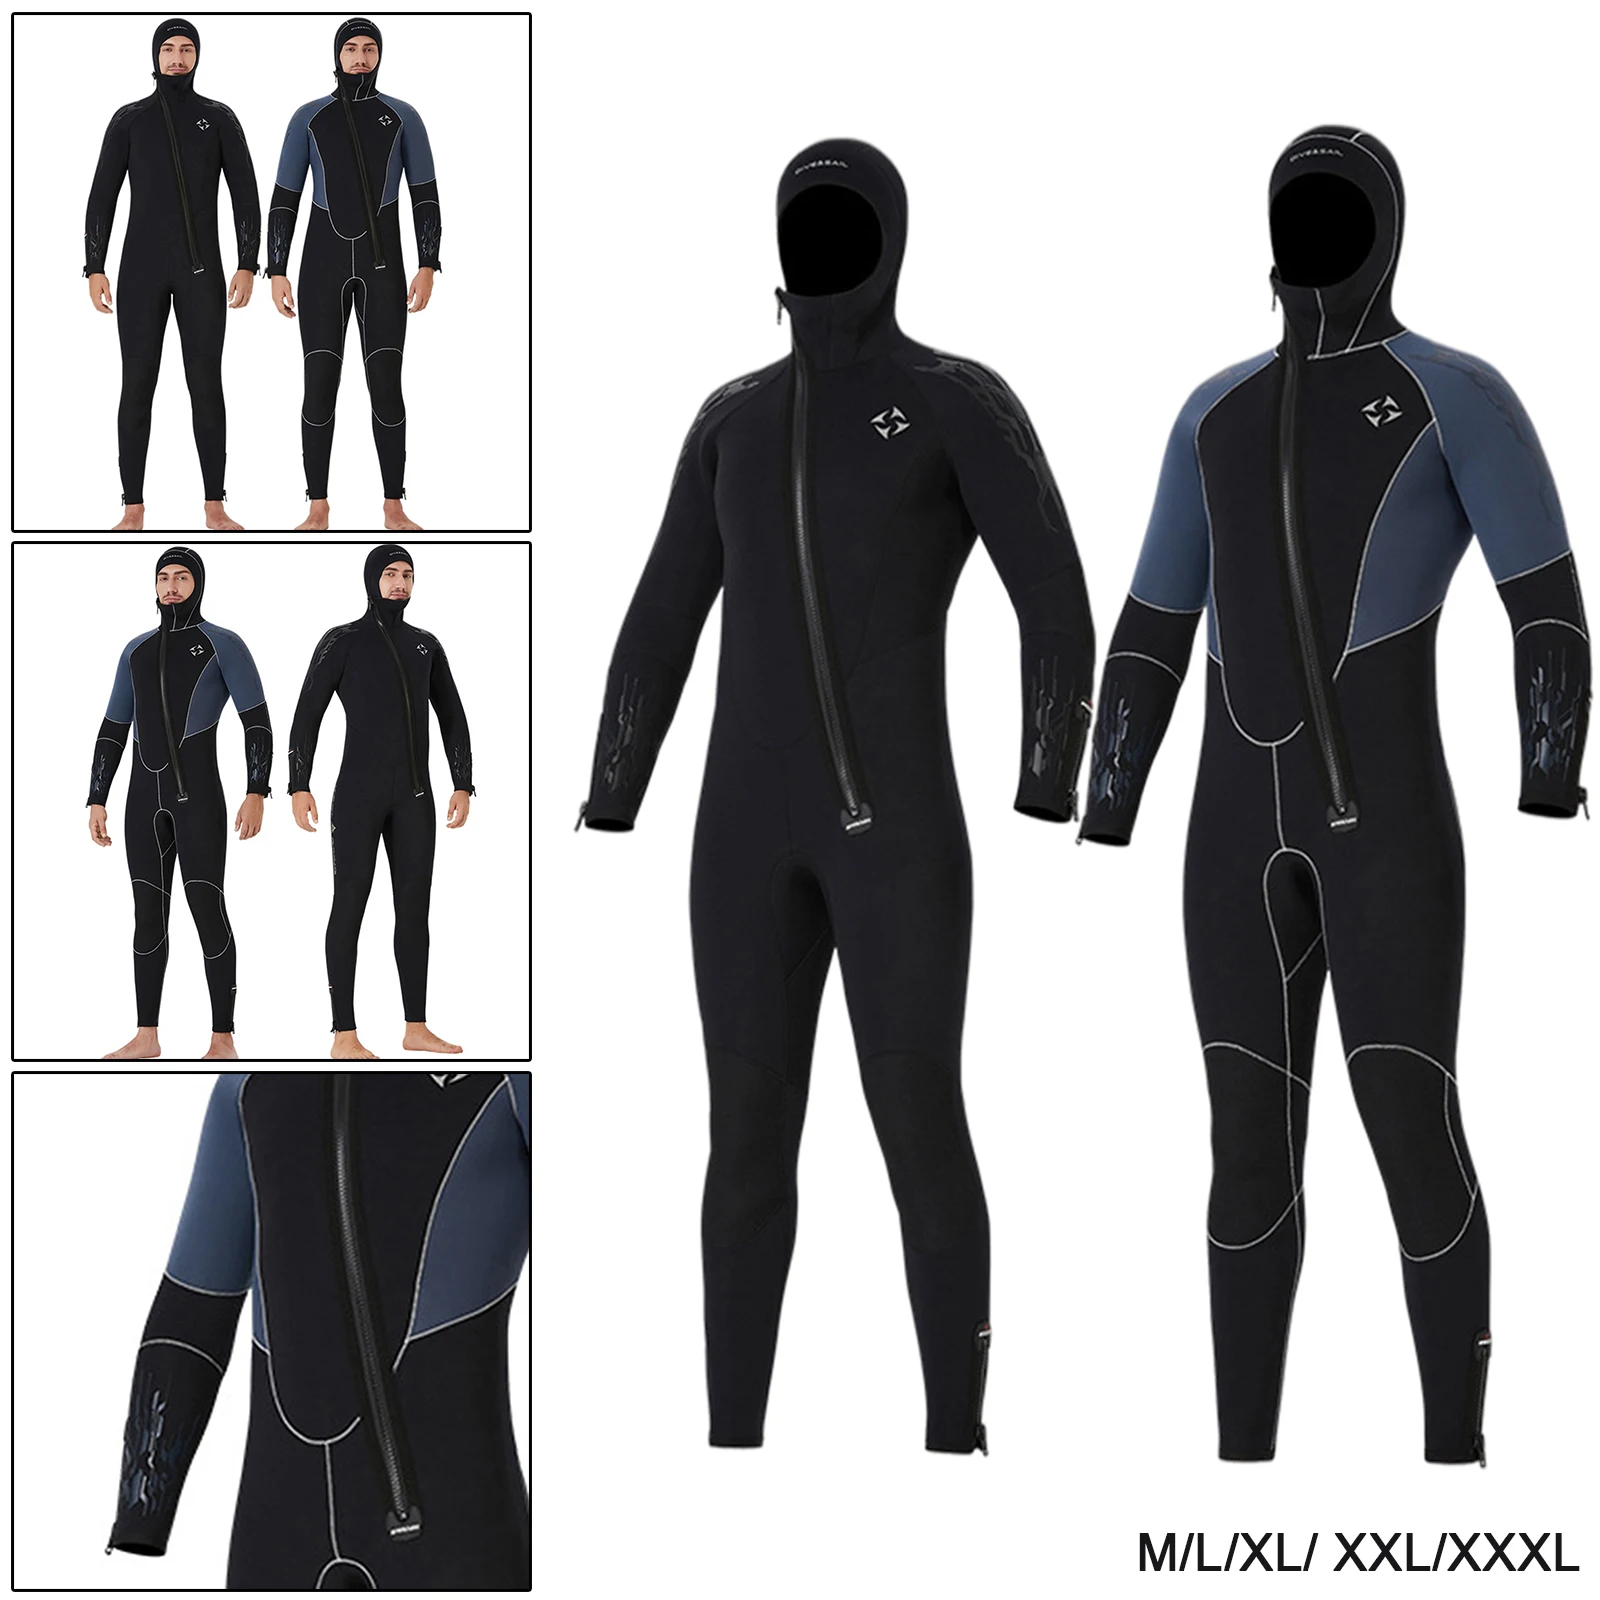 Snorkeling Neoprene Wetsuit Full Body Diving Suit Wetsuit Diving Surfing Swimming Deep Dive Wet Suit for Under Water Sports